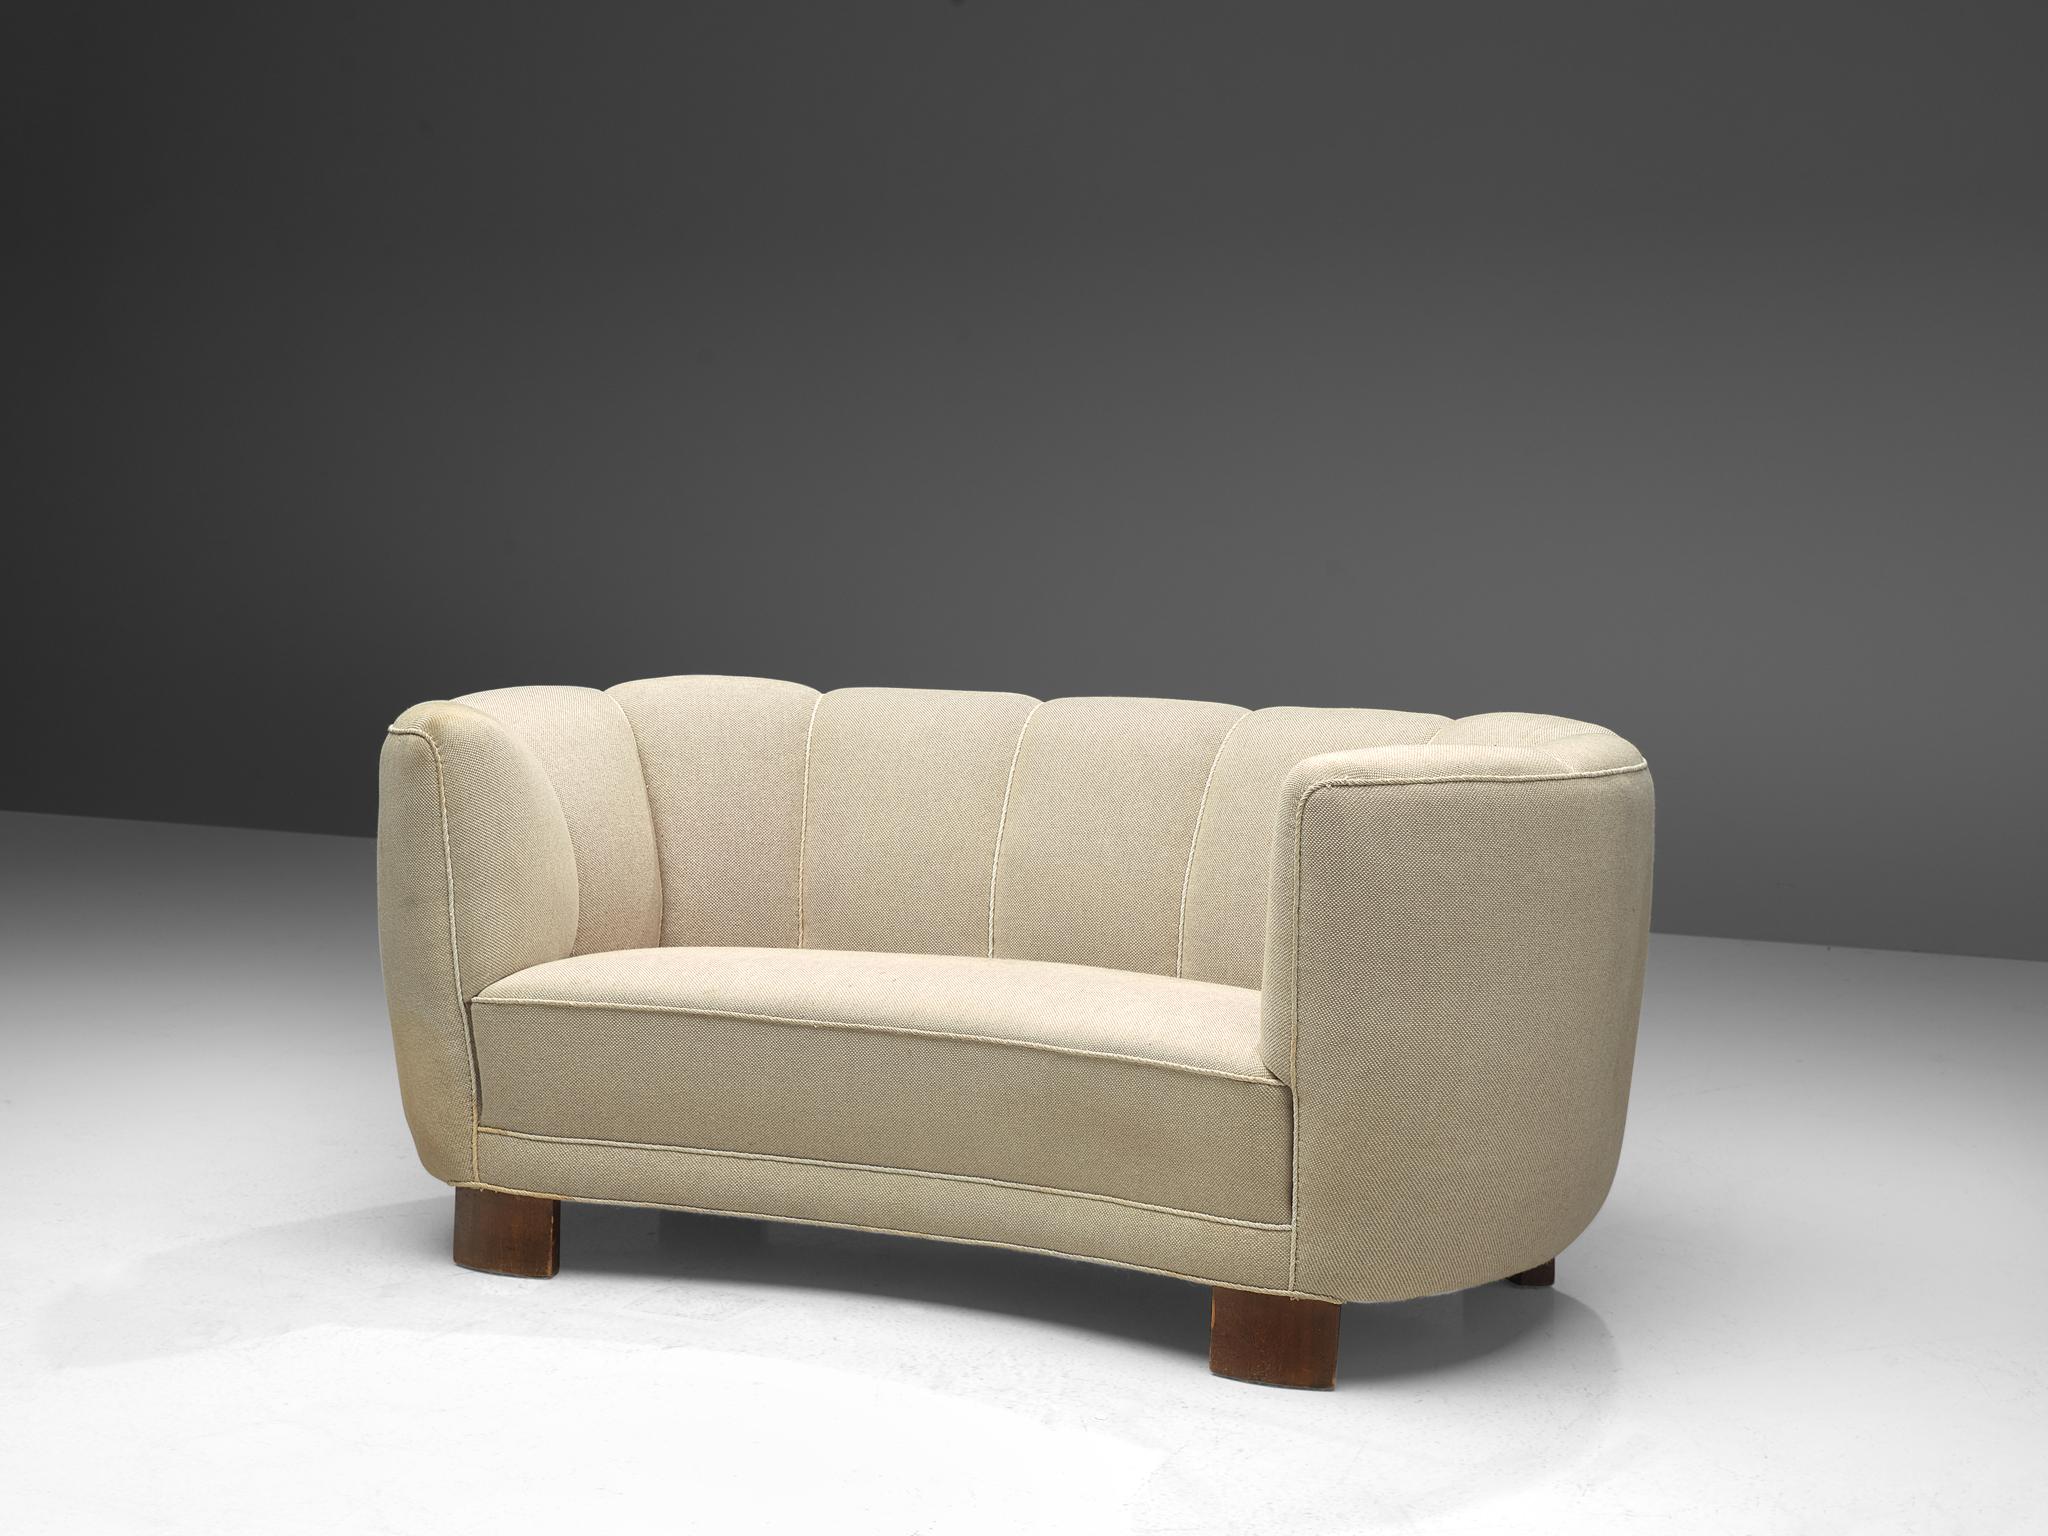 Curved settee, white fabric and oak, Denmark, 1940s

This voluptuous canapé is executed with wooden legs and a white fabric. The sofa has a high lined and curved back, while the backrest is horizontal straight and flows over into the bulky